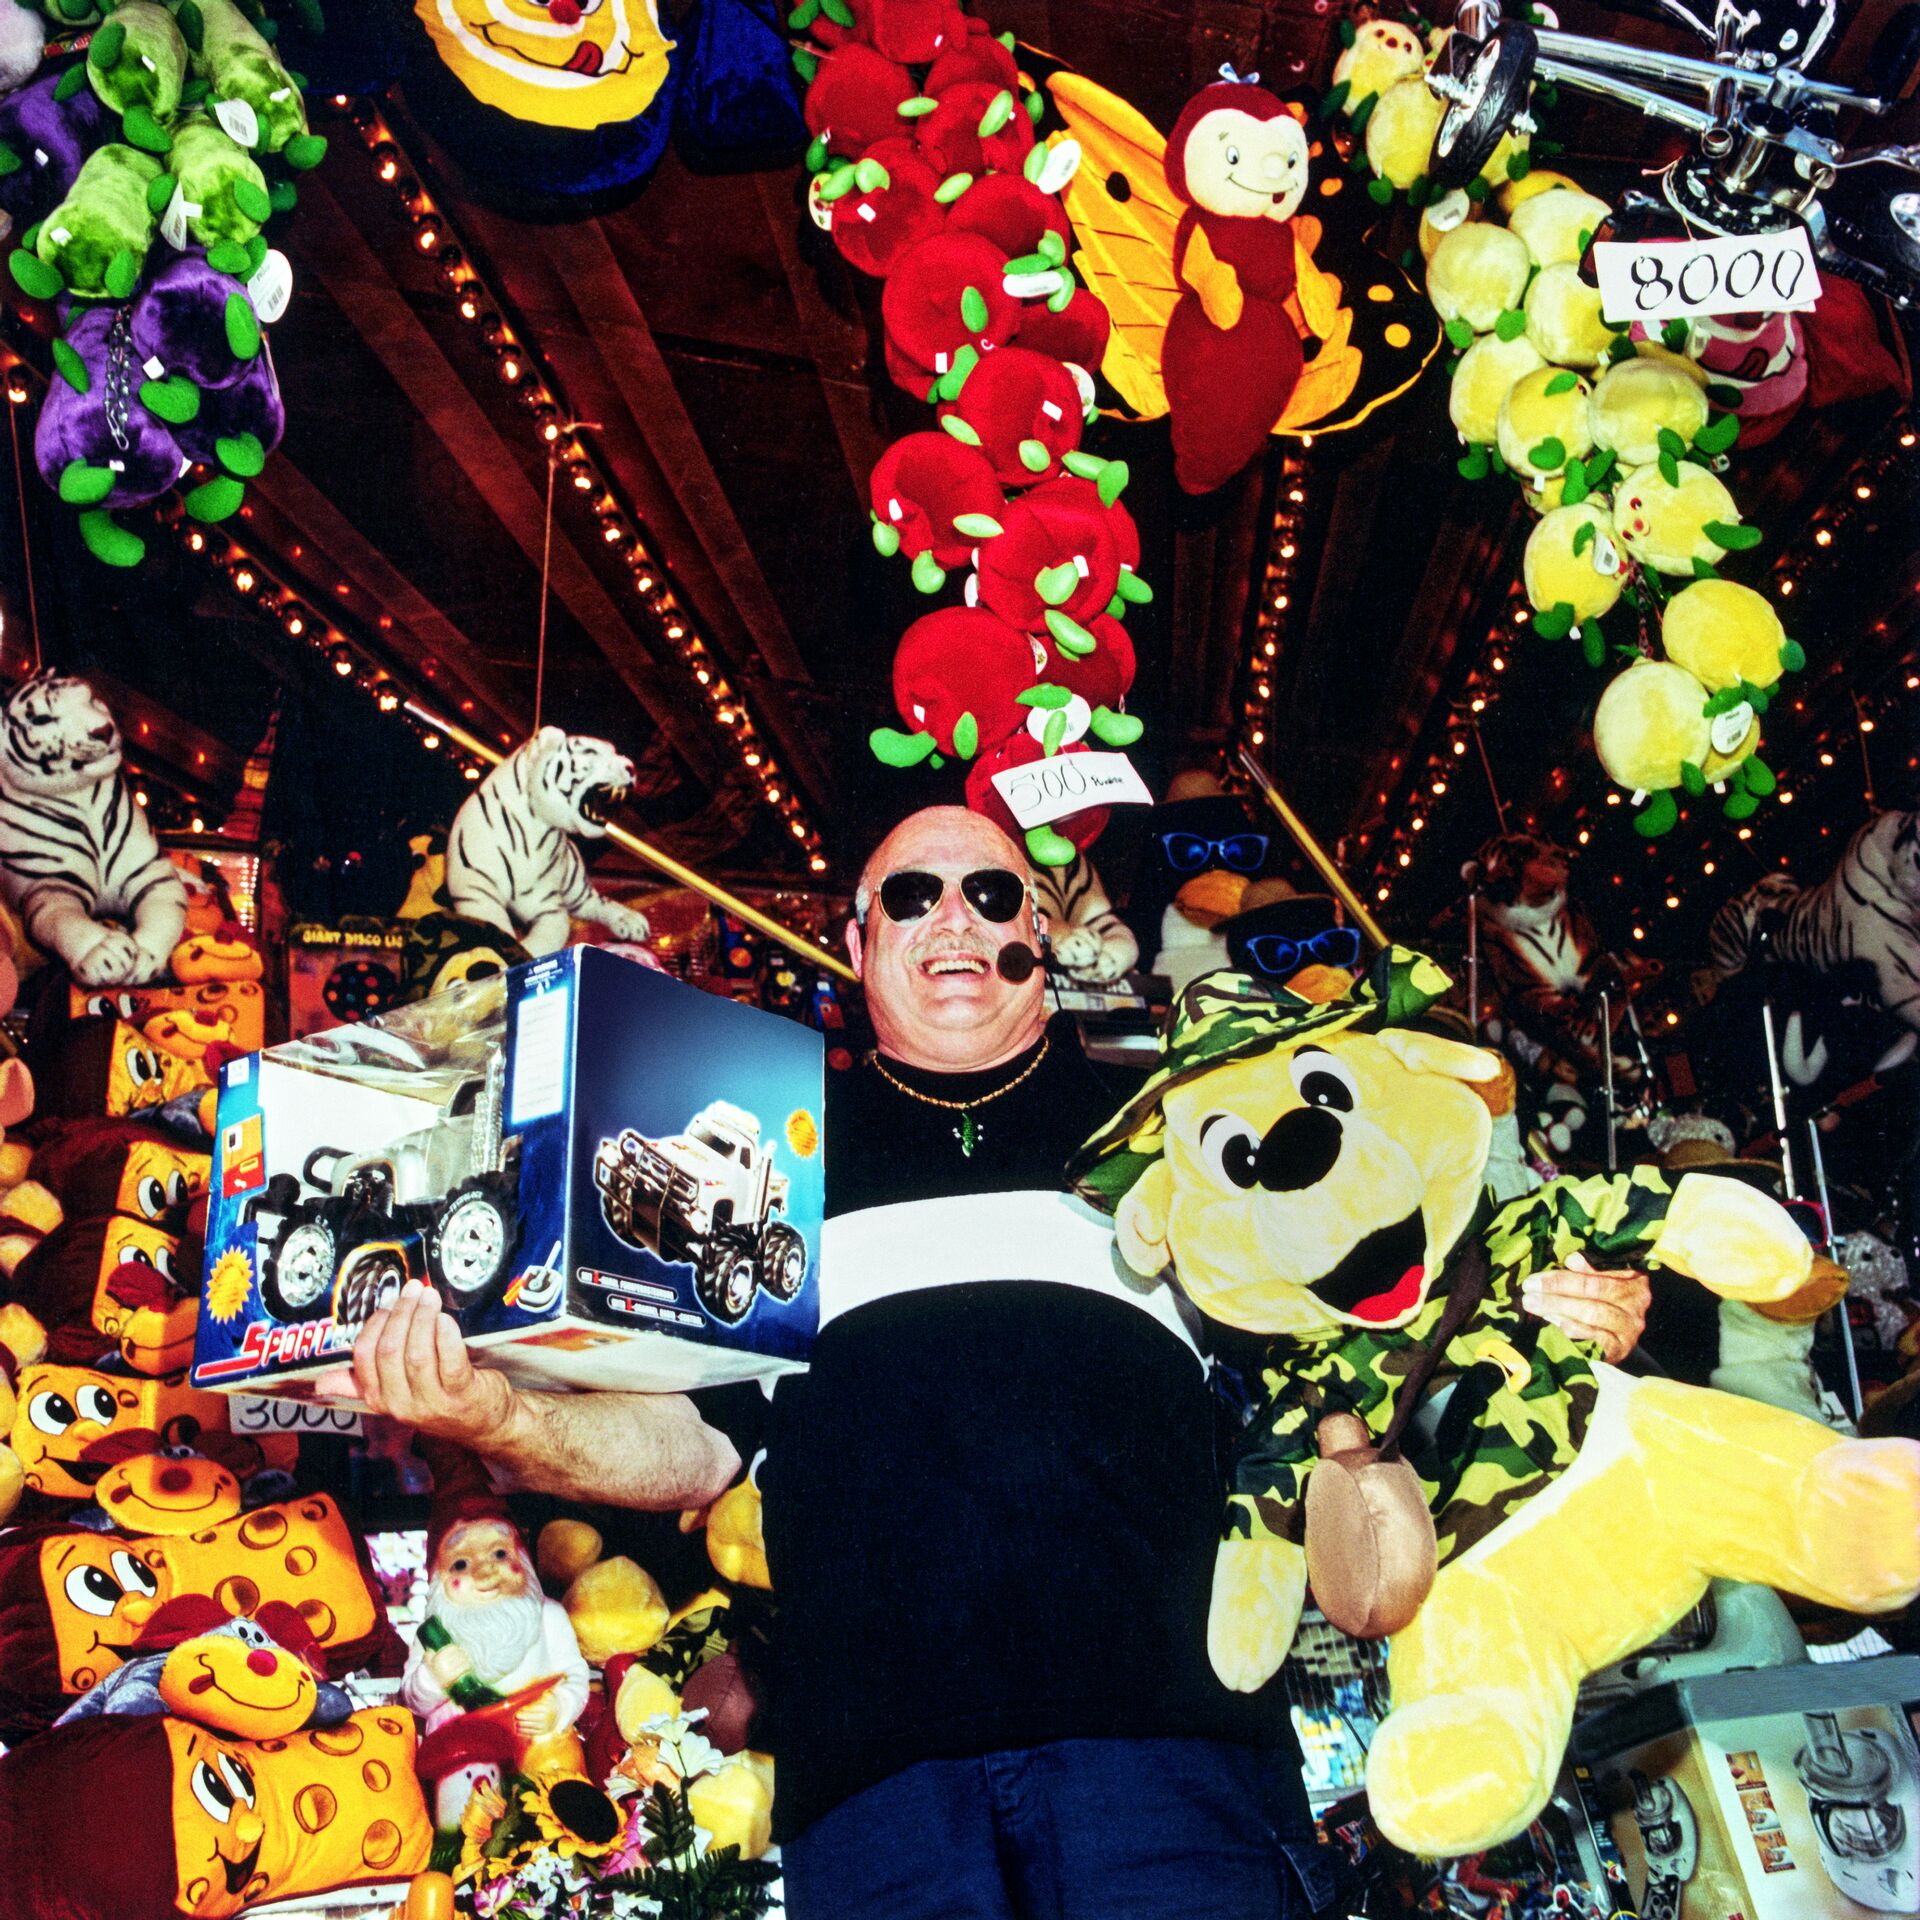 Large_MS PPT_Web-Bald man holding a remote-controlled car and big yellow stuffed animal at a fair.jpg